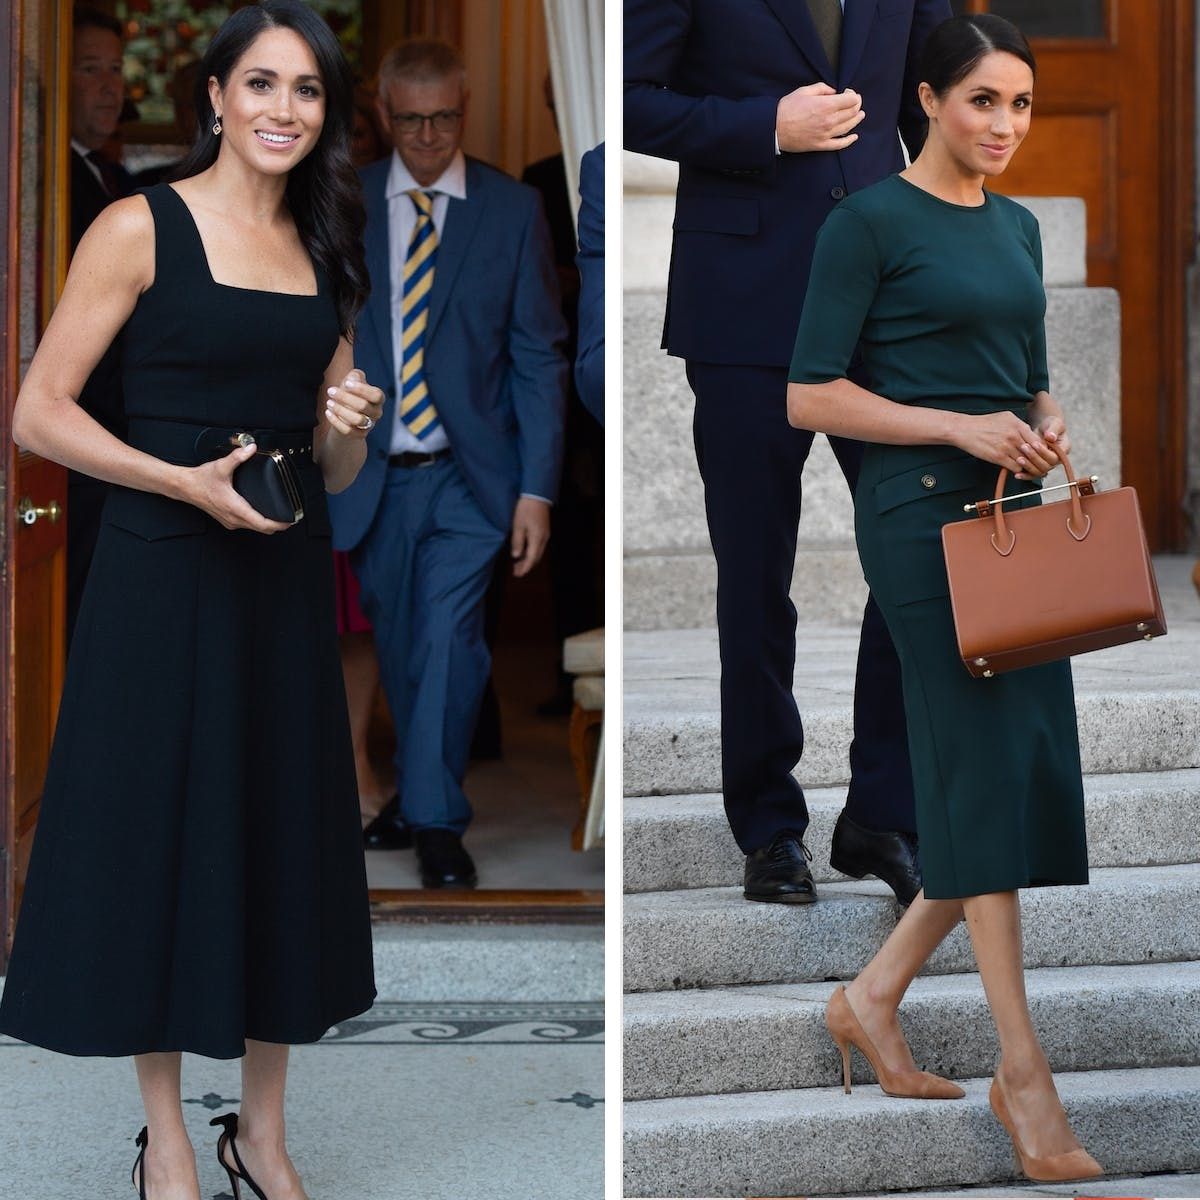 Meghan Markle’s Ireland Tour Looks Are the Epitome of Minimalist Royal Style